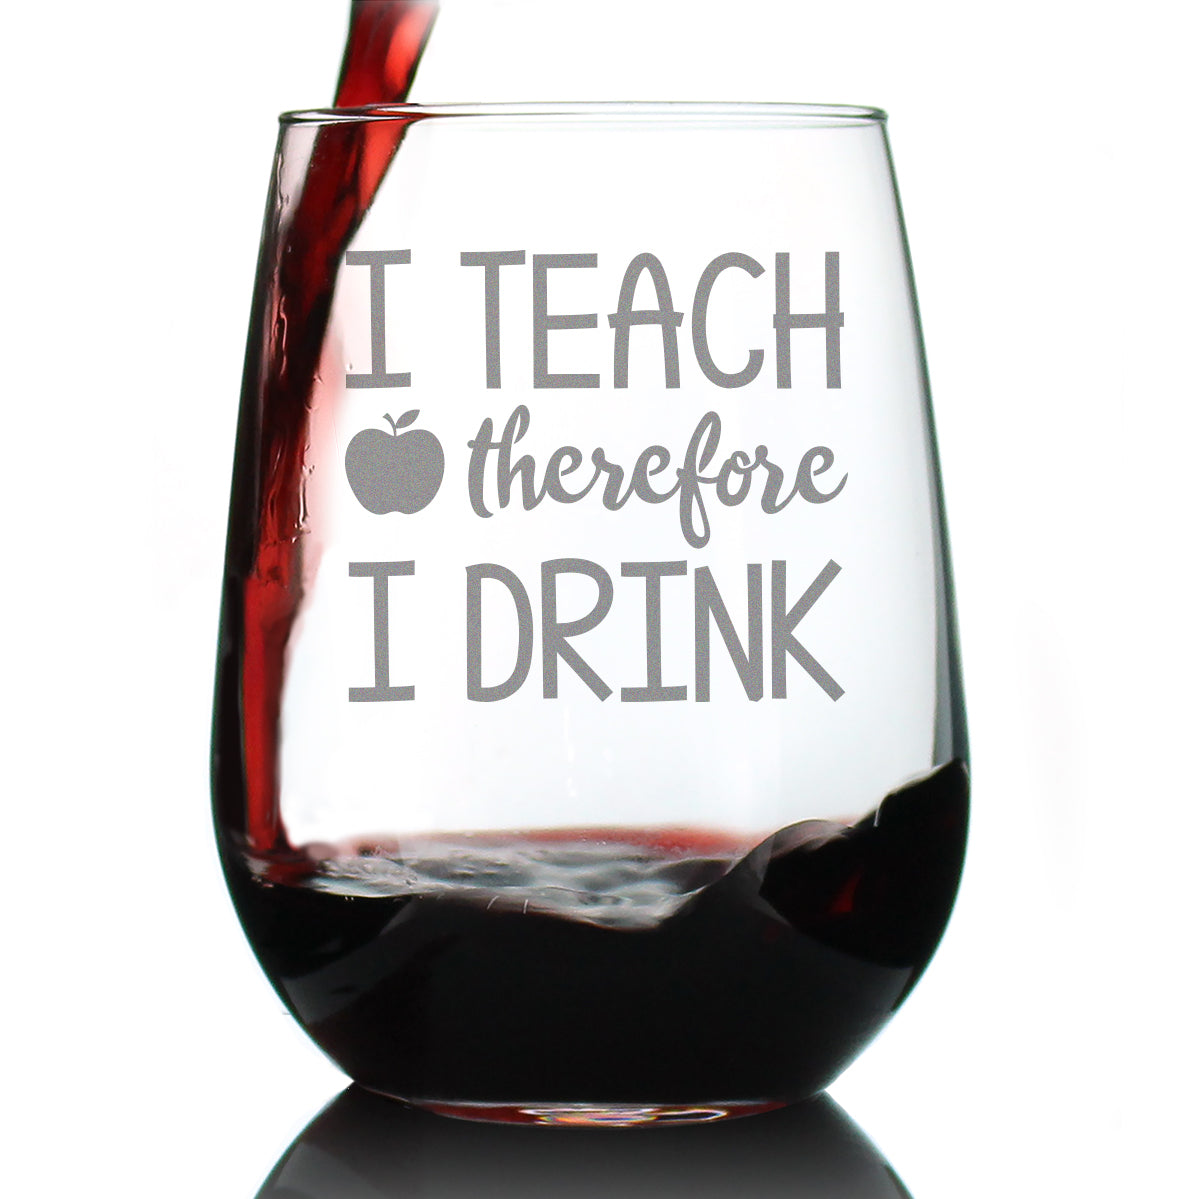 I Teach Therefore I Drink - 17 Ounce Stemless Wine Glass